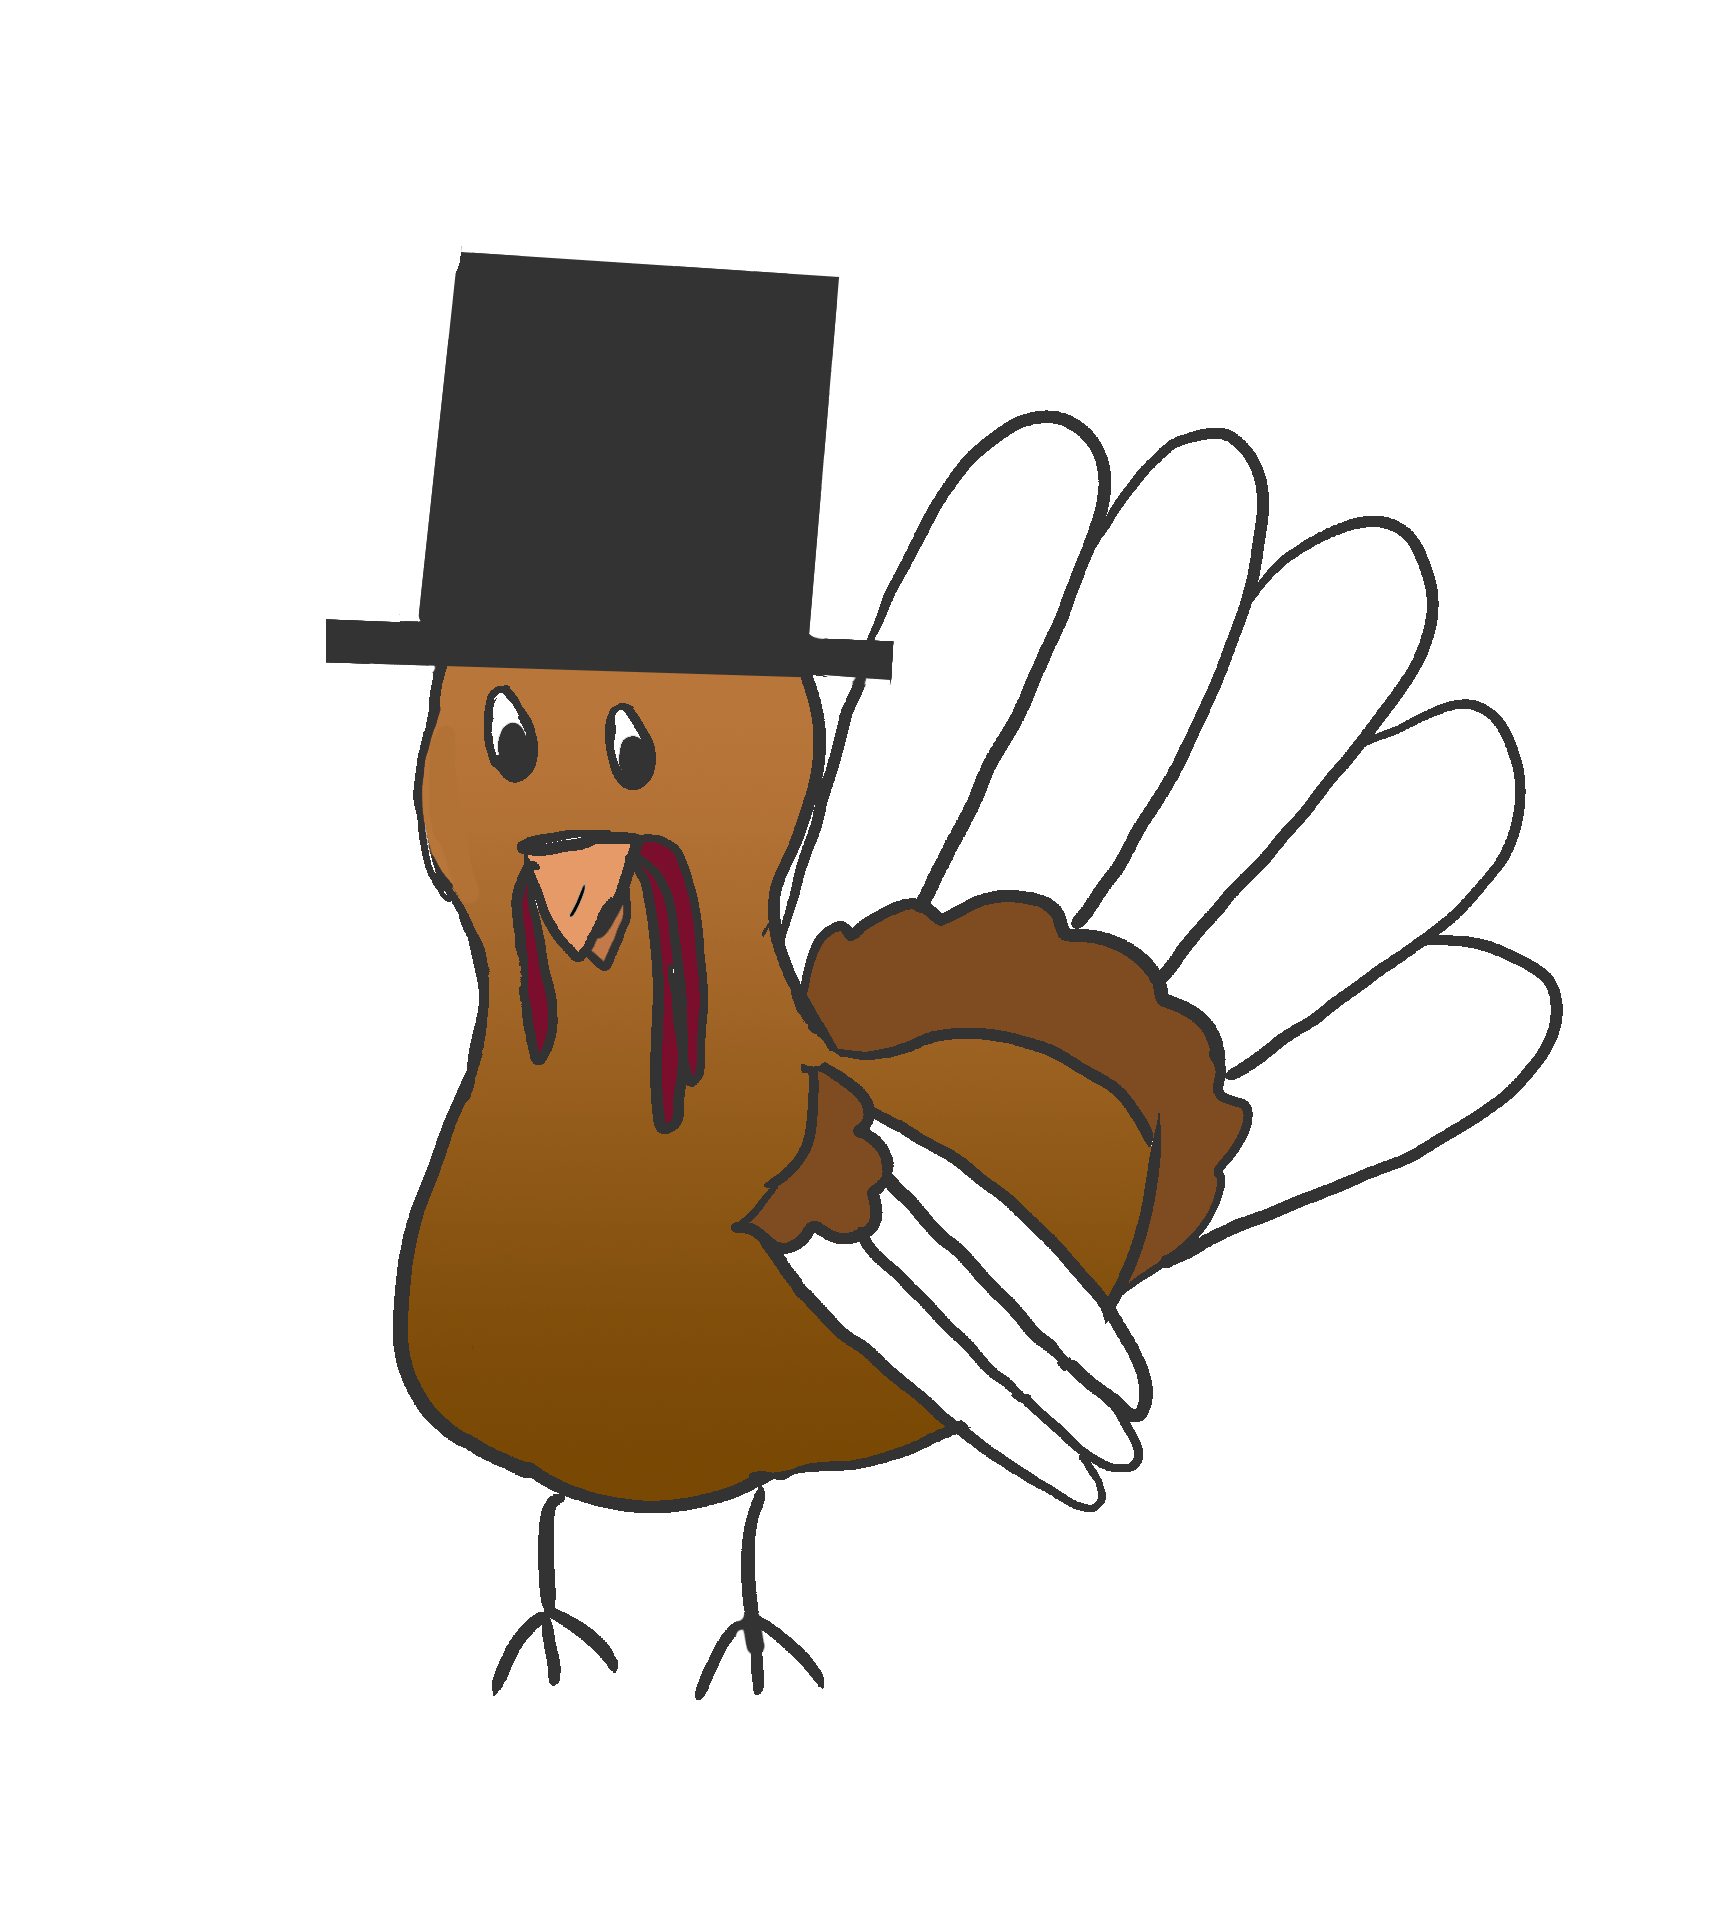 Gif of a turkey wearing a tophat with its feathers changing rainbow colors